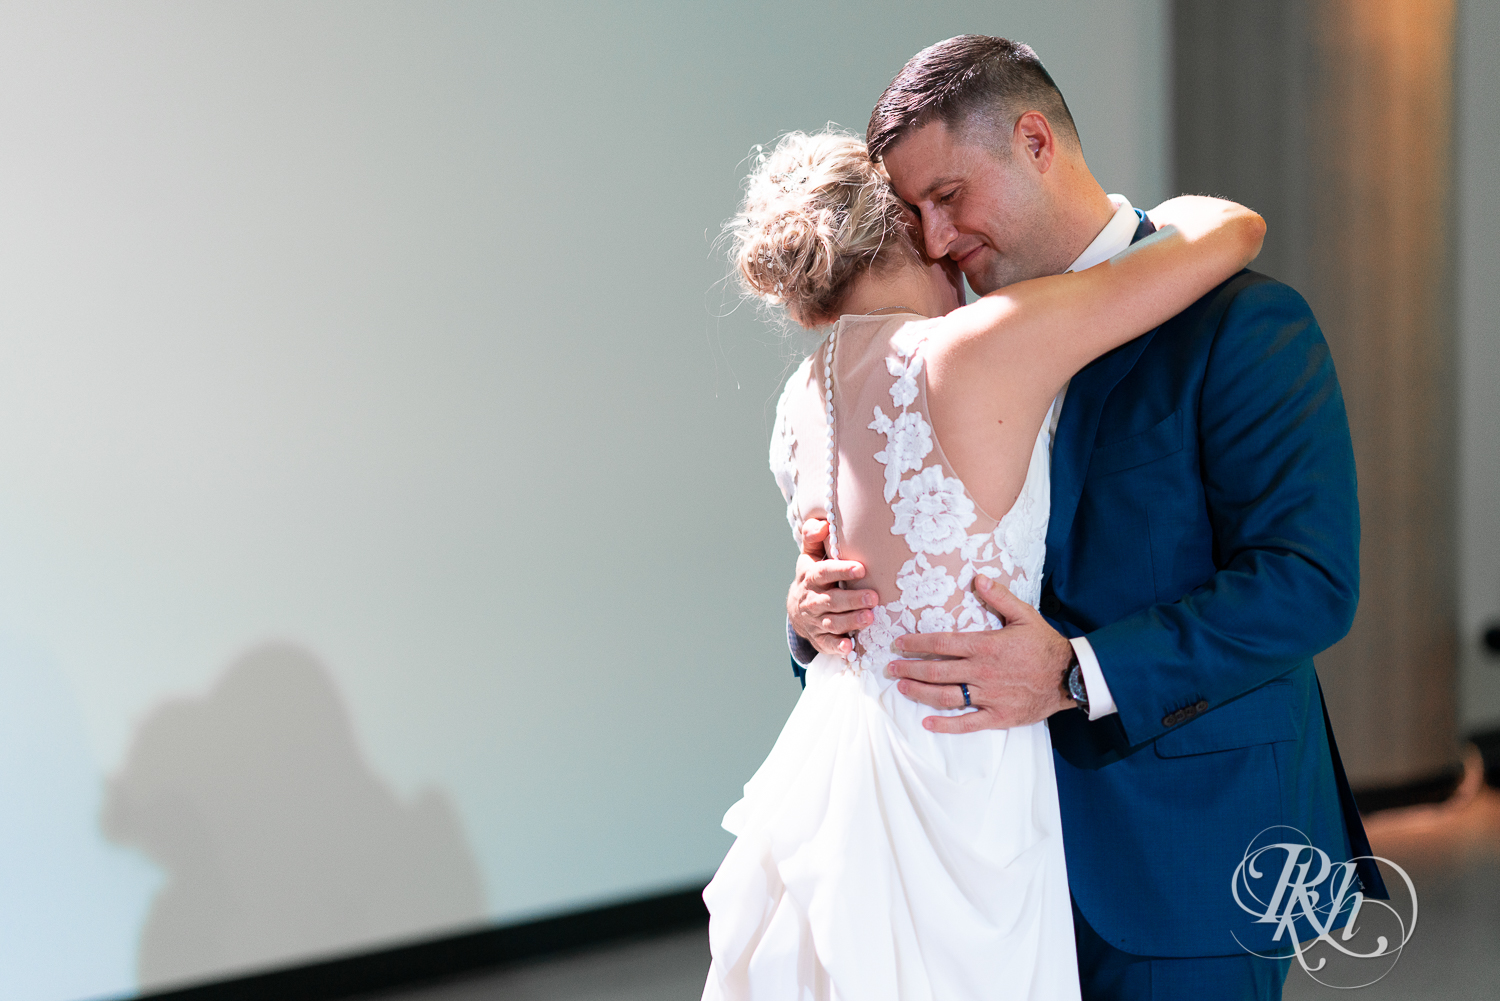 Bride and groom share first dance during wedding at Saint Paul Event Center in Saint Paul, Minnesota.